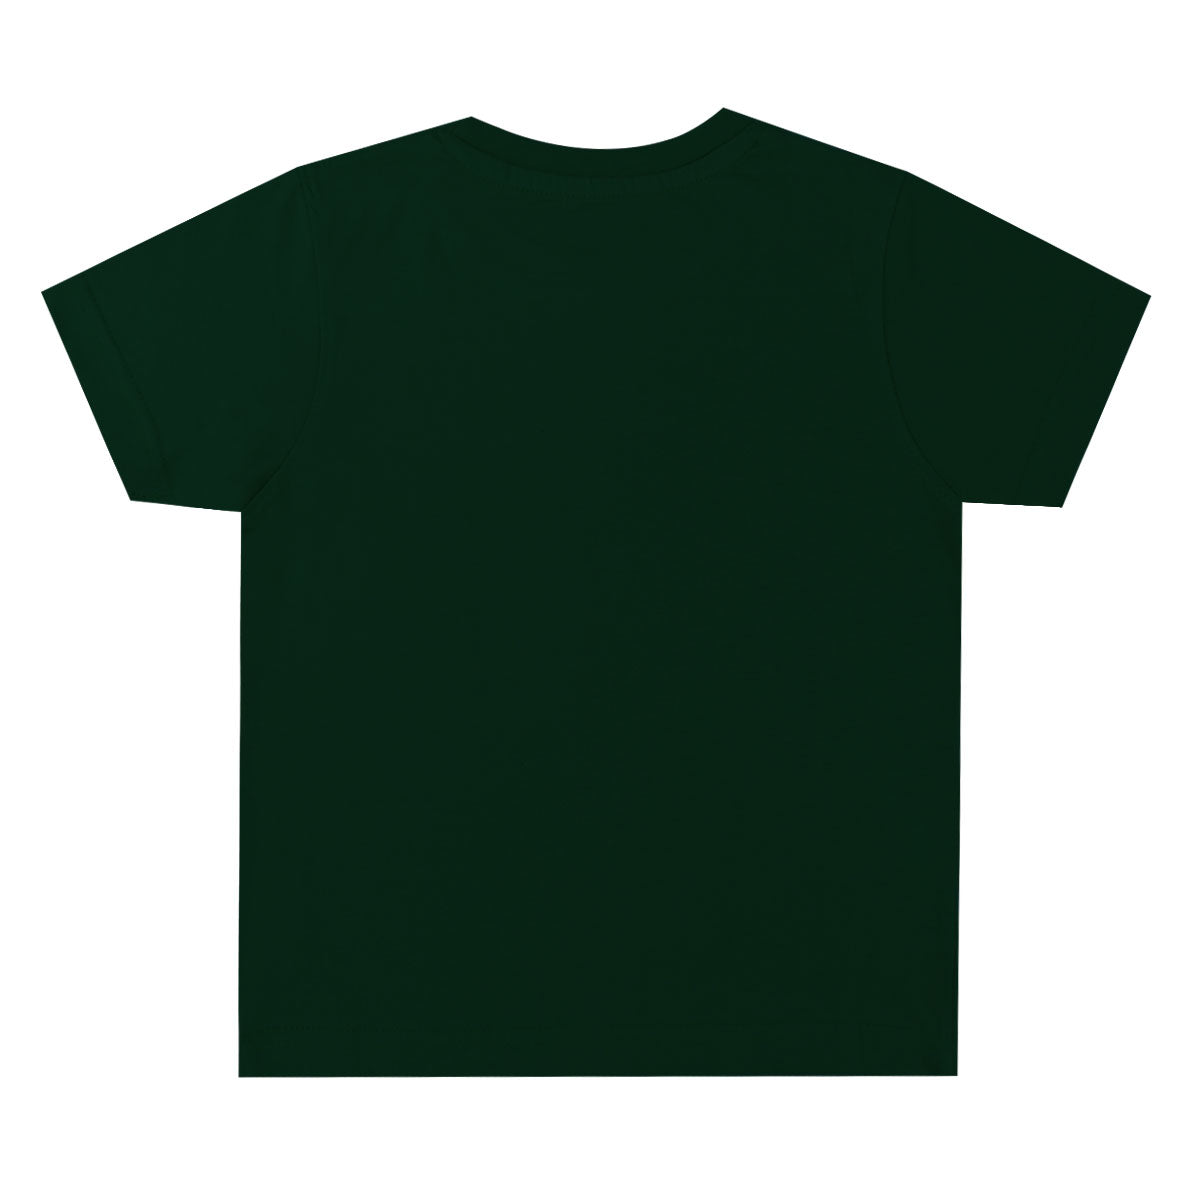 One In A Million - Premium Round Neck Cotton Tees for Kids - Cactus Green And Navy Blue